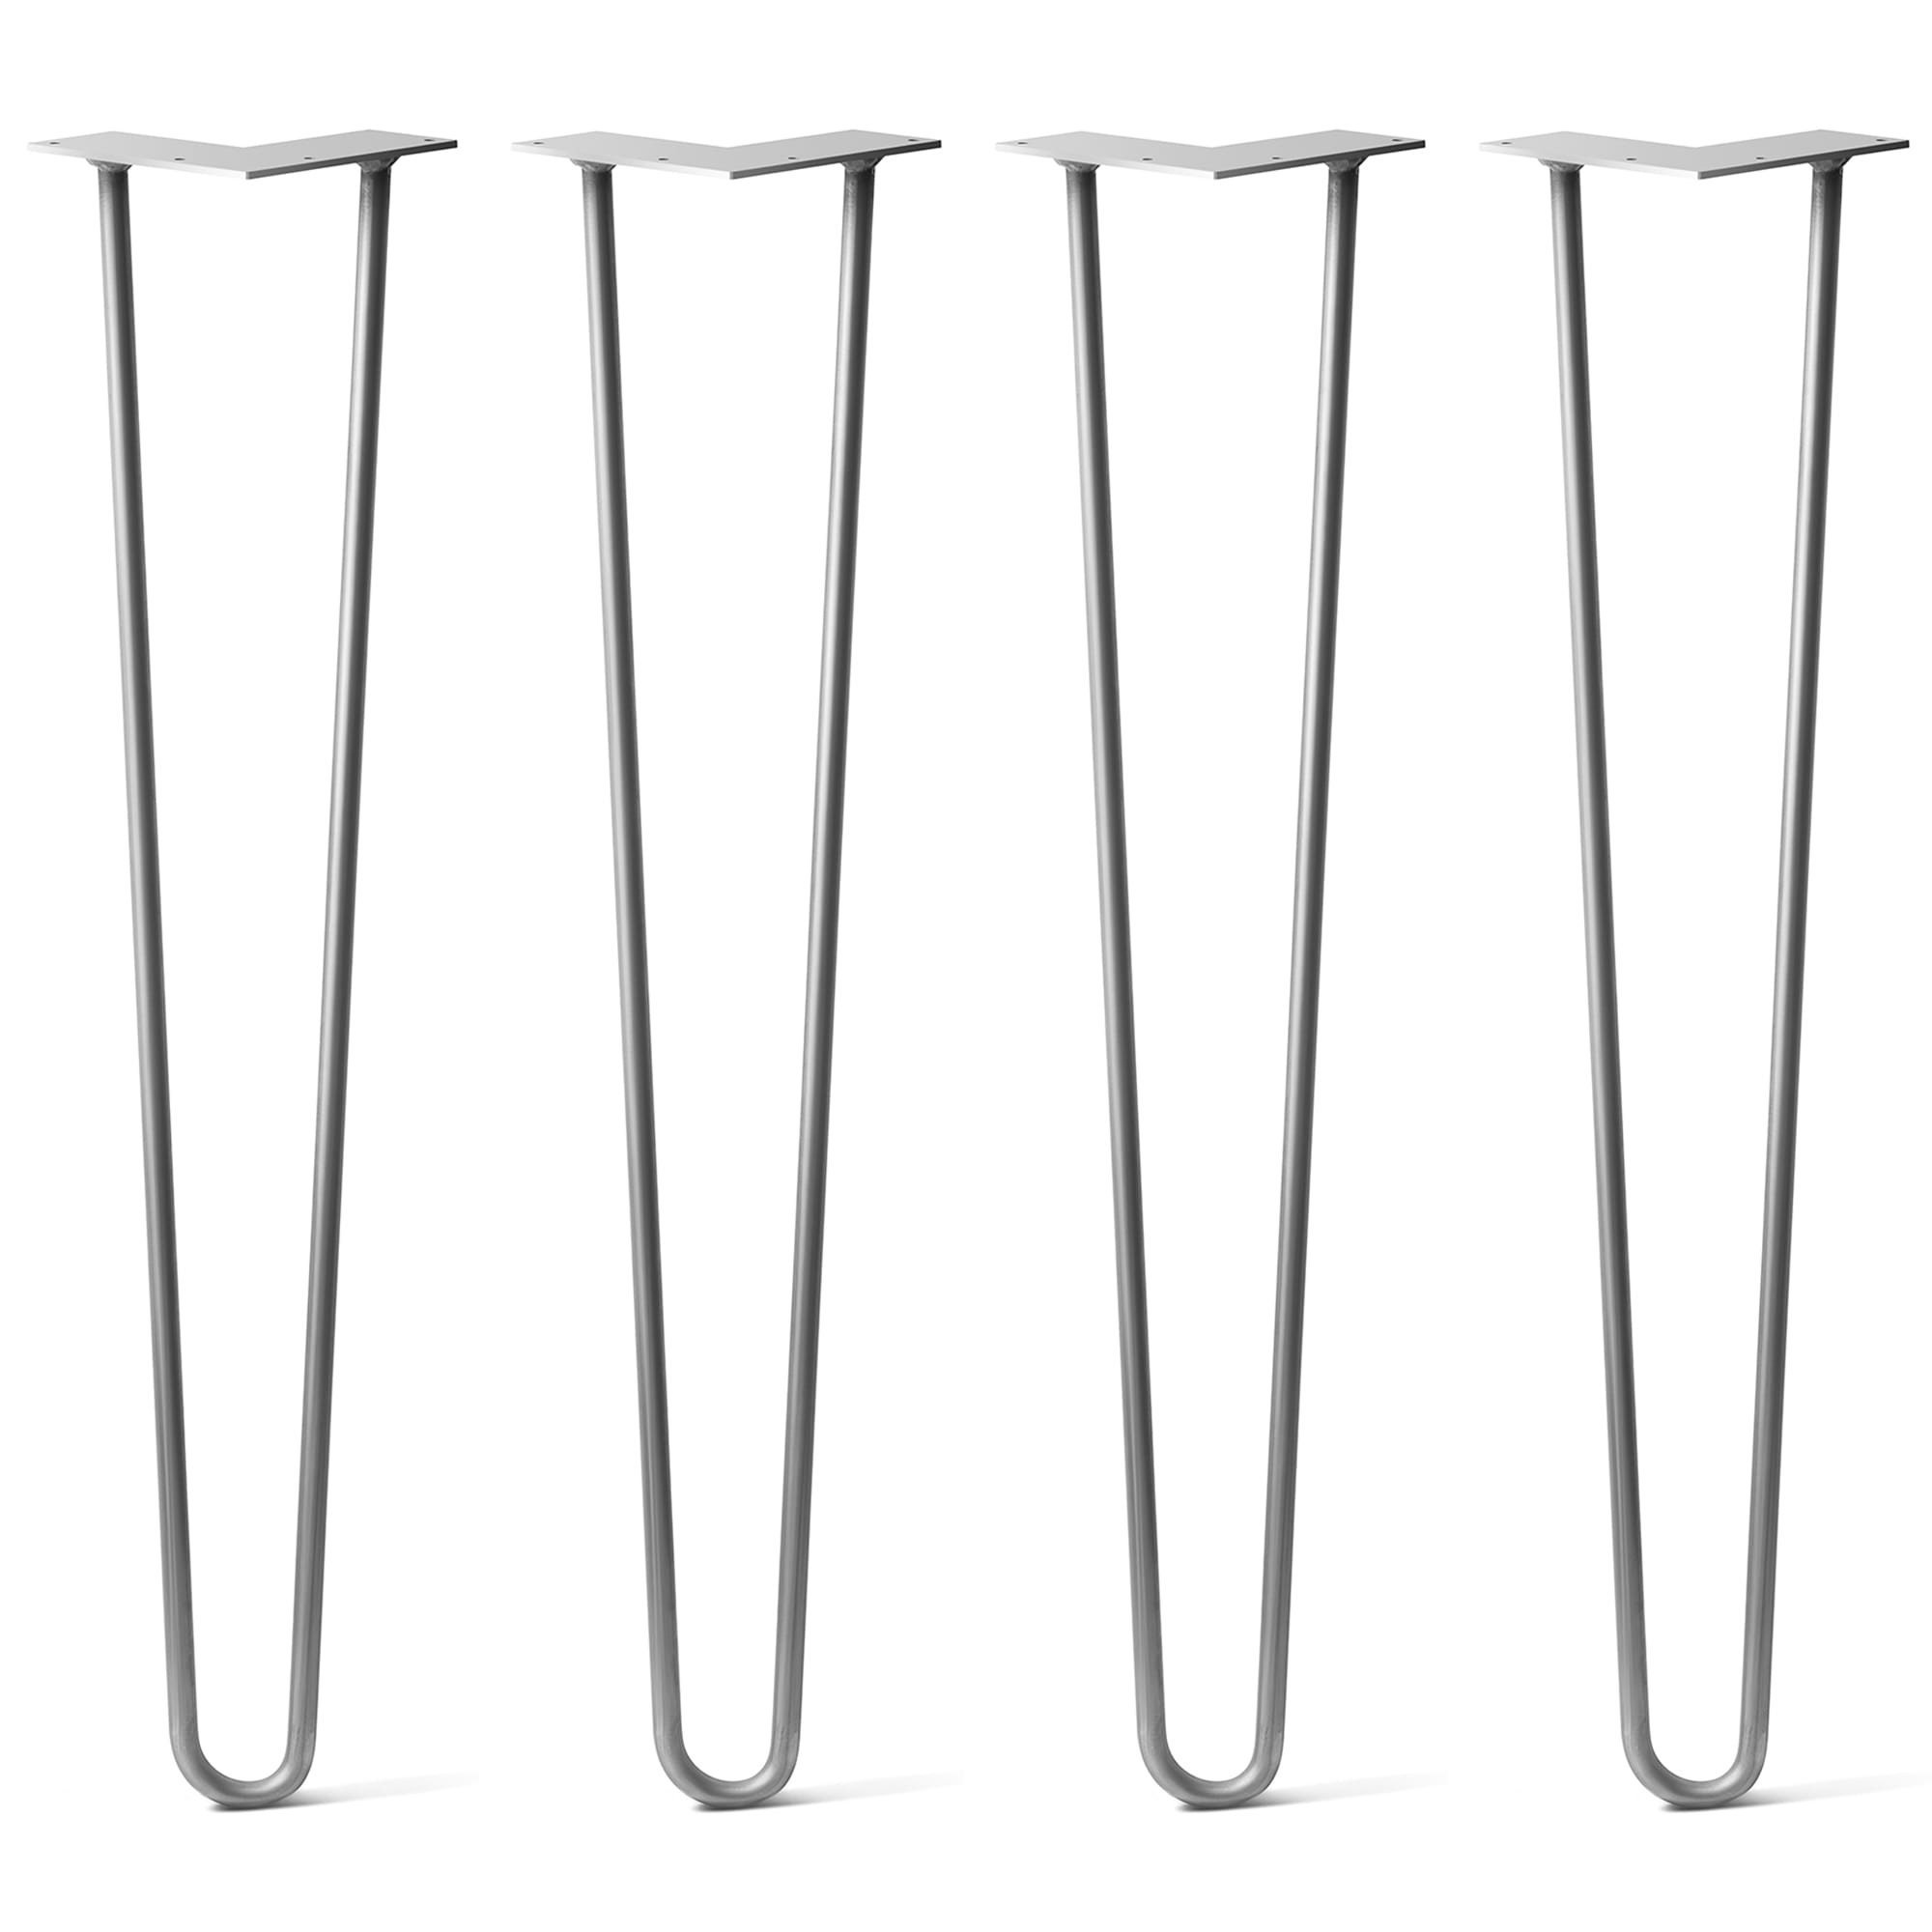 Hairpin Legs Set of 4 2rod Clear Select From 4 | Etsy